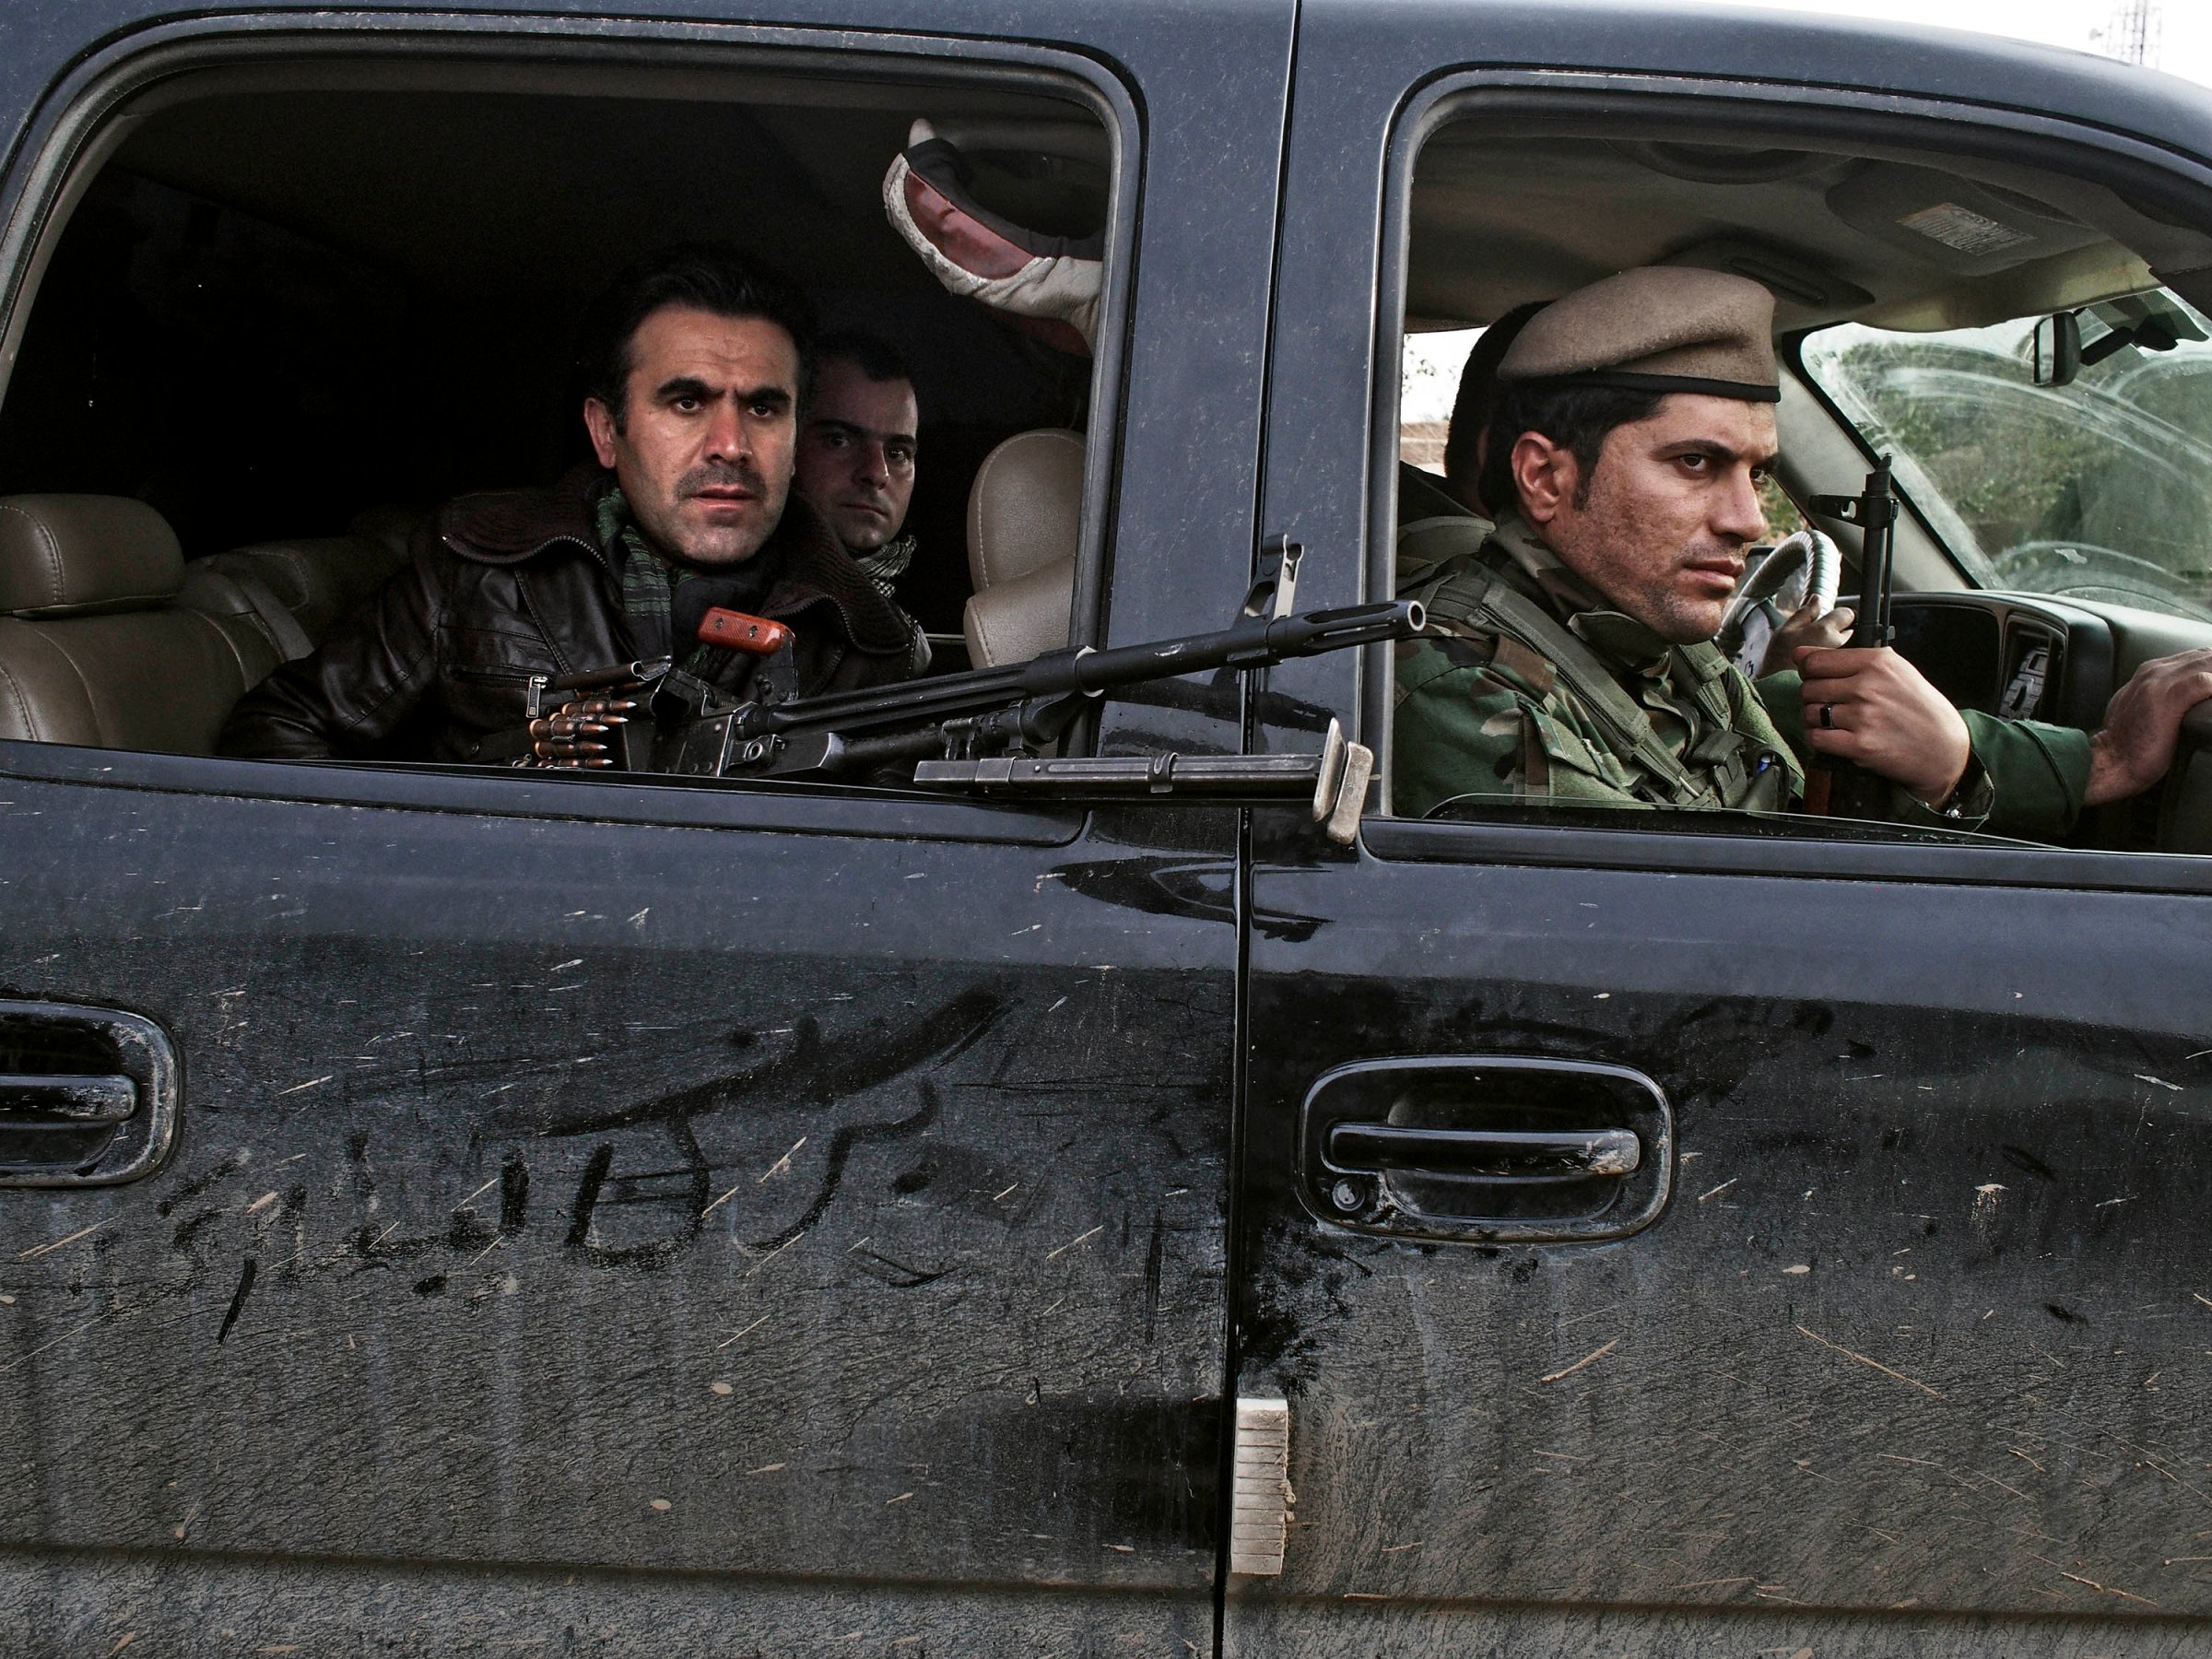 Counterattack: Kurdish soldiers drive through an Iraqi village in December after taking it back from ISIS forces